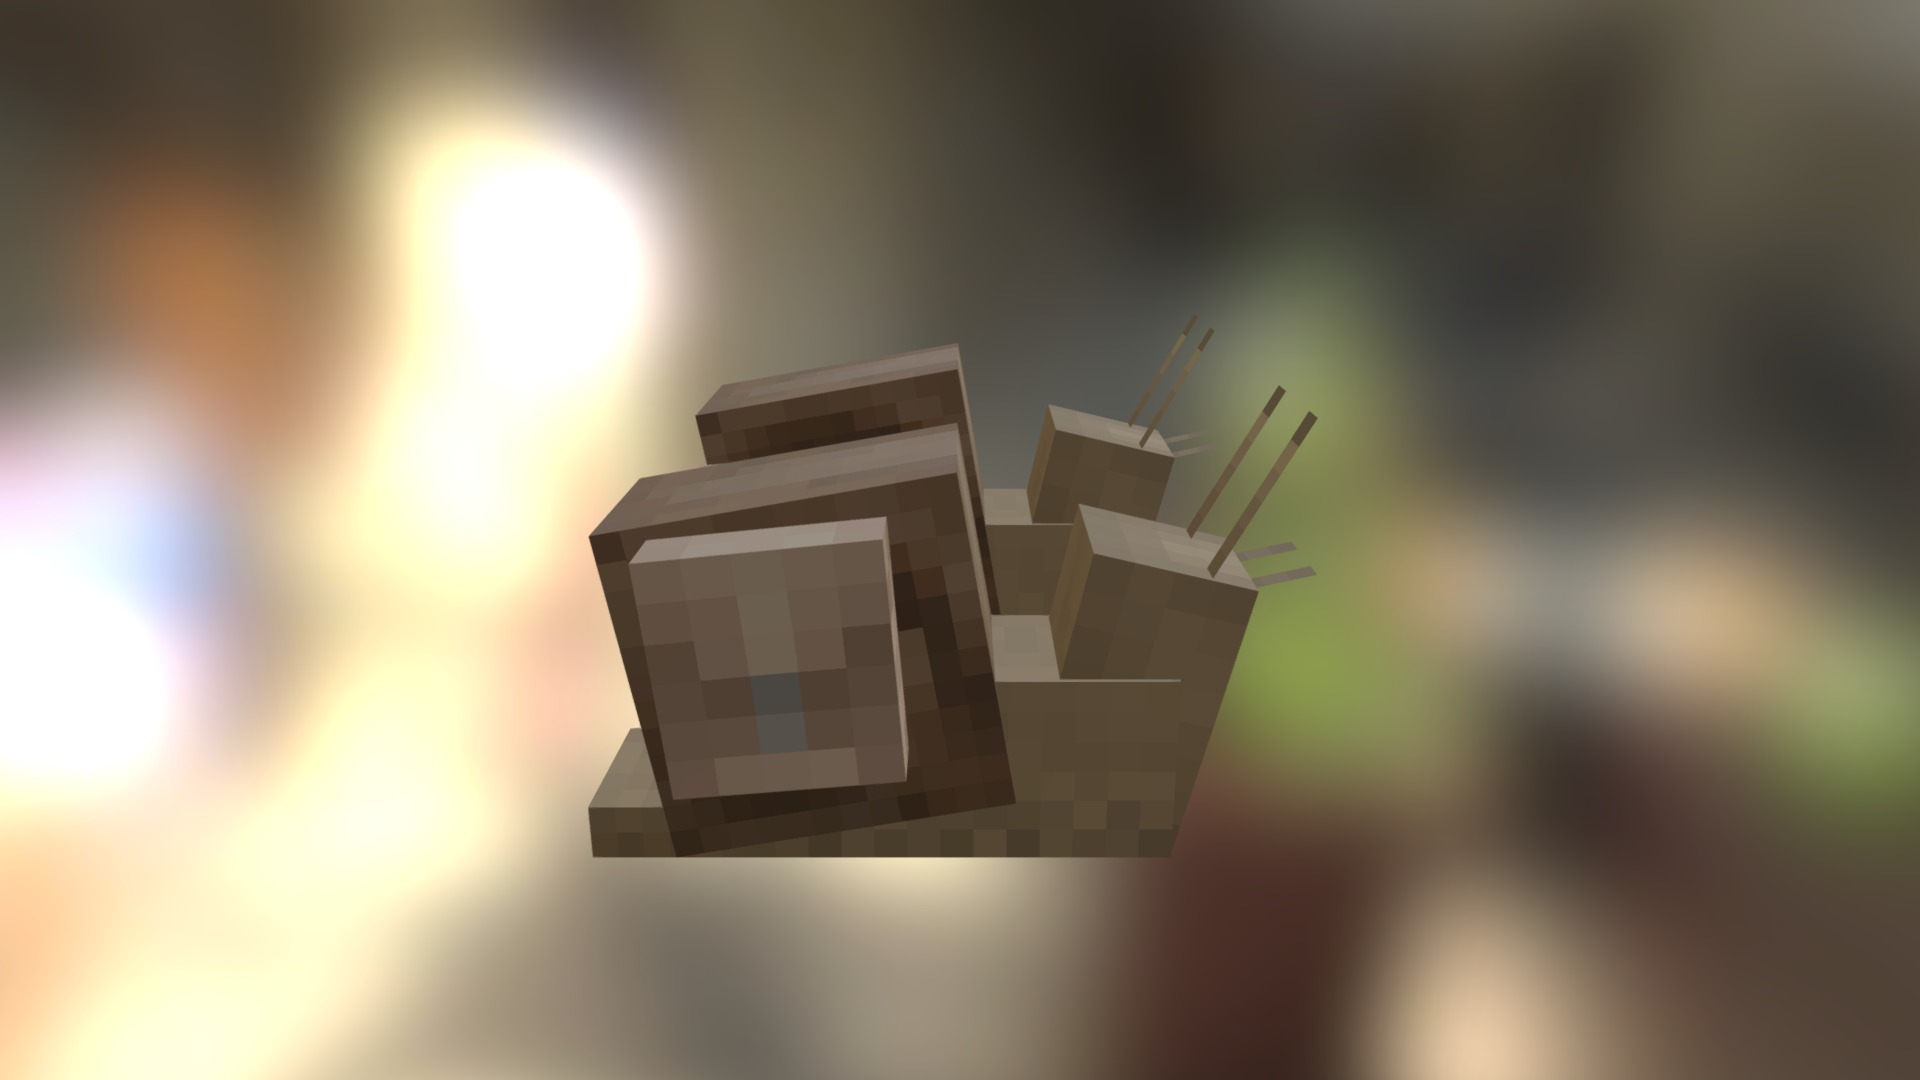 3D model Minecraft Style Snail - This is a 3D model of the Minecraft Style Snail. The 3D model is about a cube with a light shining on it.